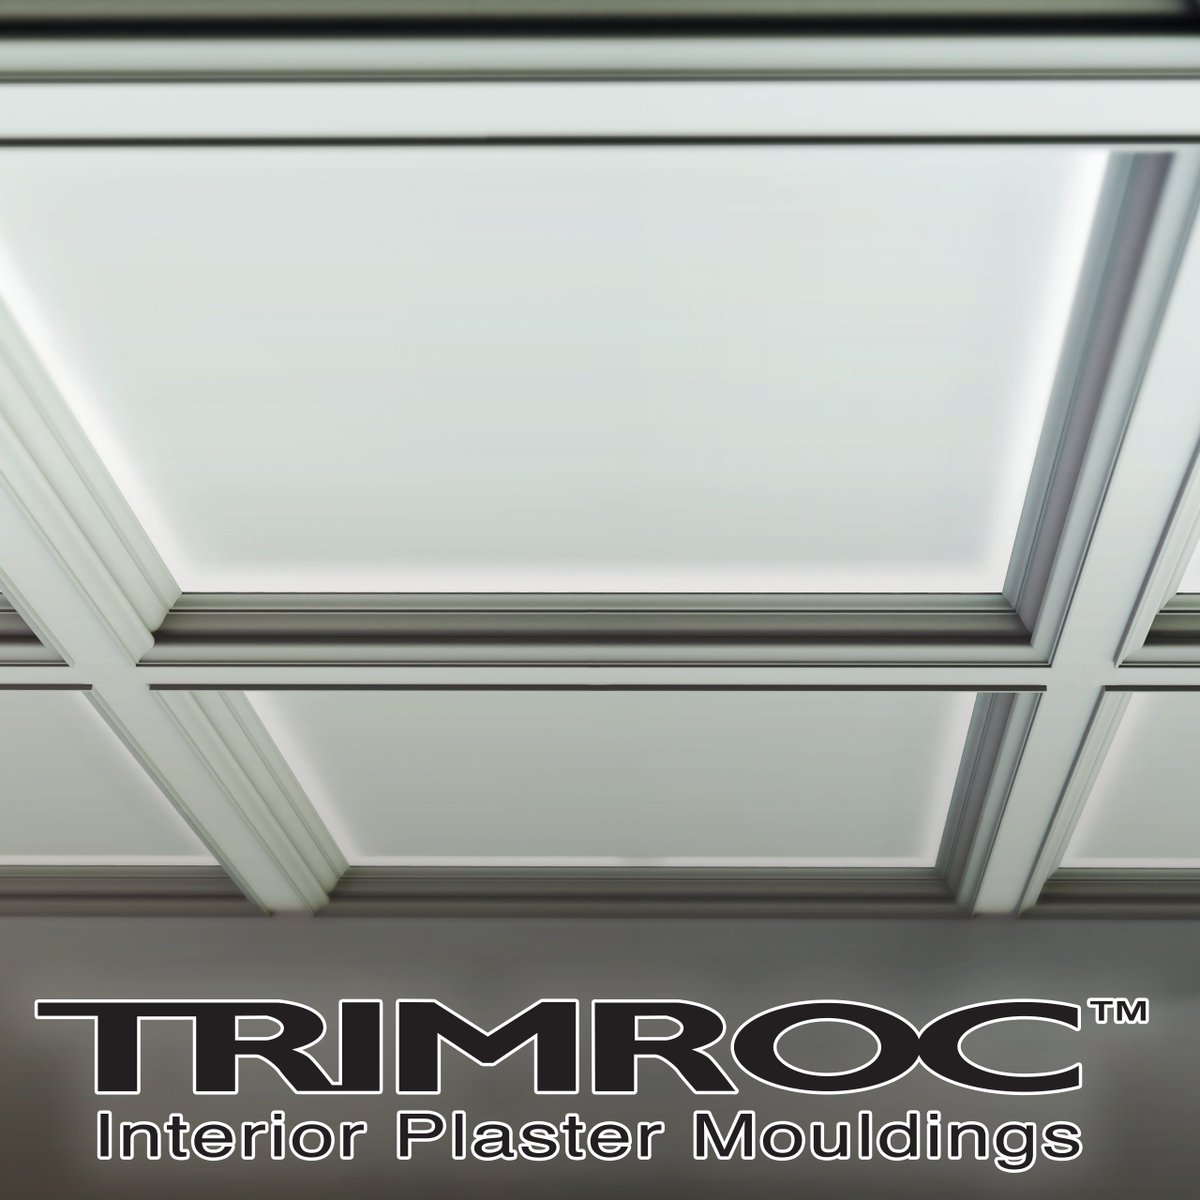 Beautify your interiors with TRIMROC (TM) Interior Mounding.
.
.
.
#homedecor #home #homeupgrade #gtahomebuyers #homeselection #homeinspirations #dreamhome #homeinspiration #homeinspo #homesweethome #customhome #customhomebuilder #hometour #newhomeconstruction #ontariohomes